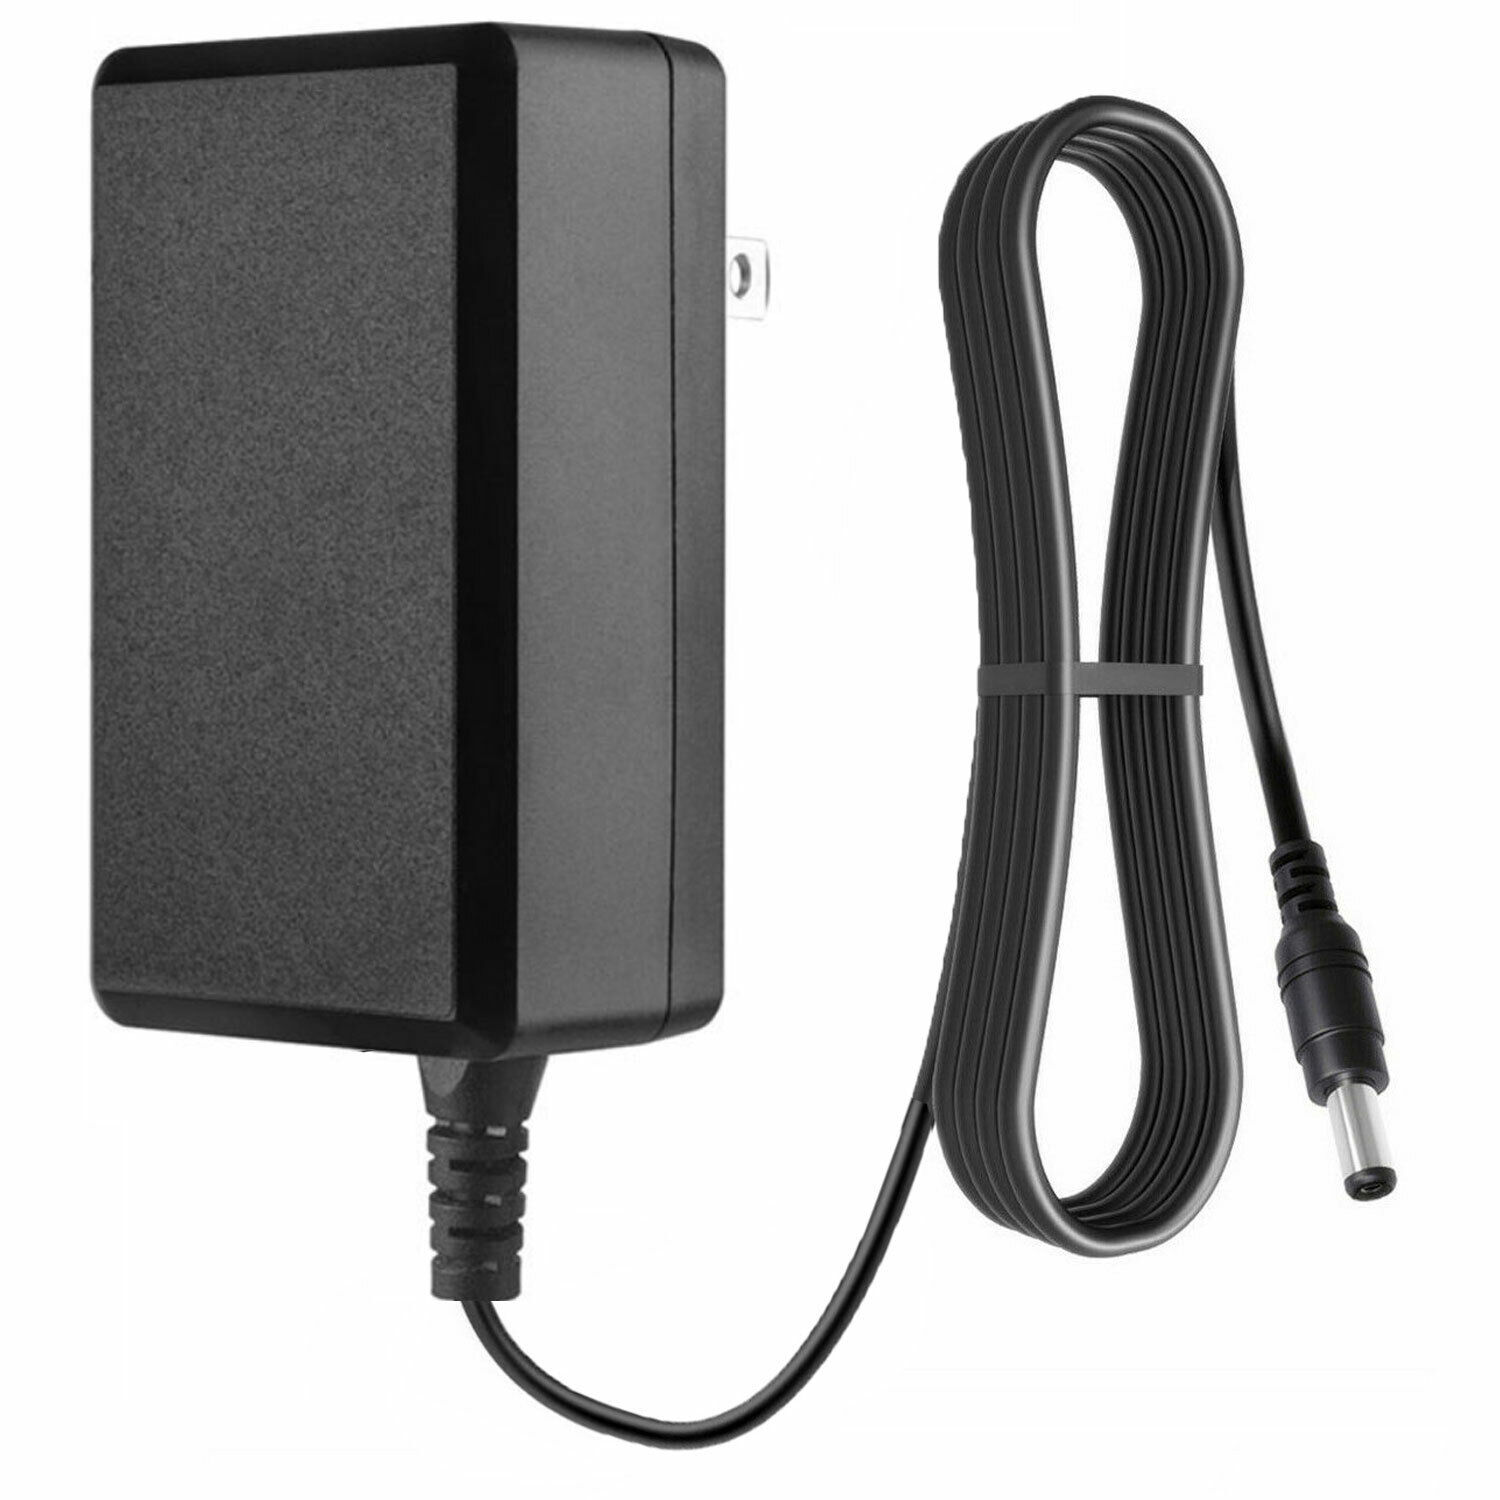 AC12V AC Adapter For Vestax PMC-06Pro VCA PMC-06ProVCA PMC-06ProA Mixer Power Charger Technical Specifications: 1 AC In